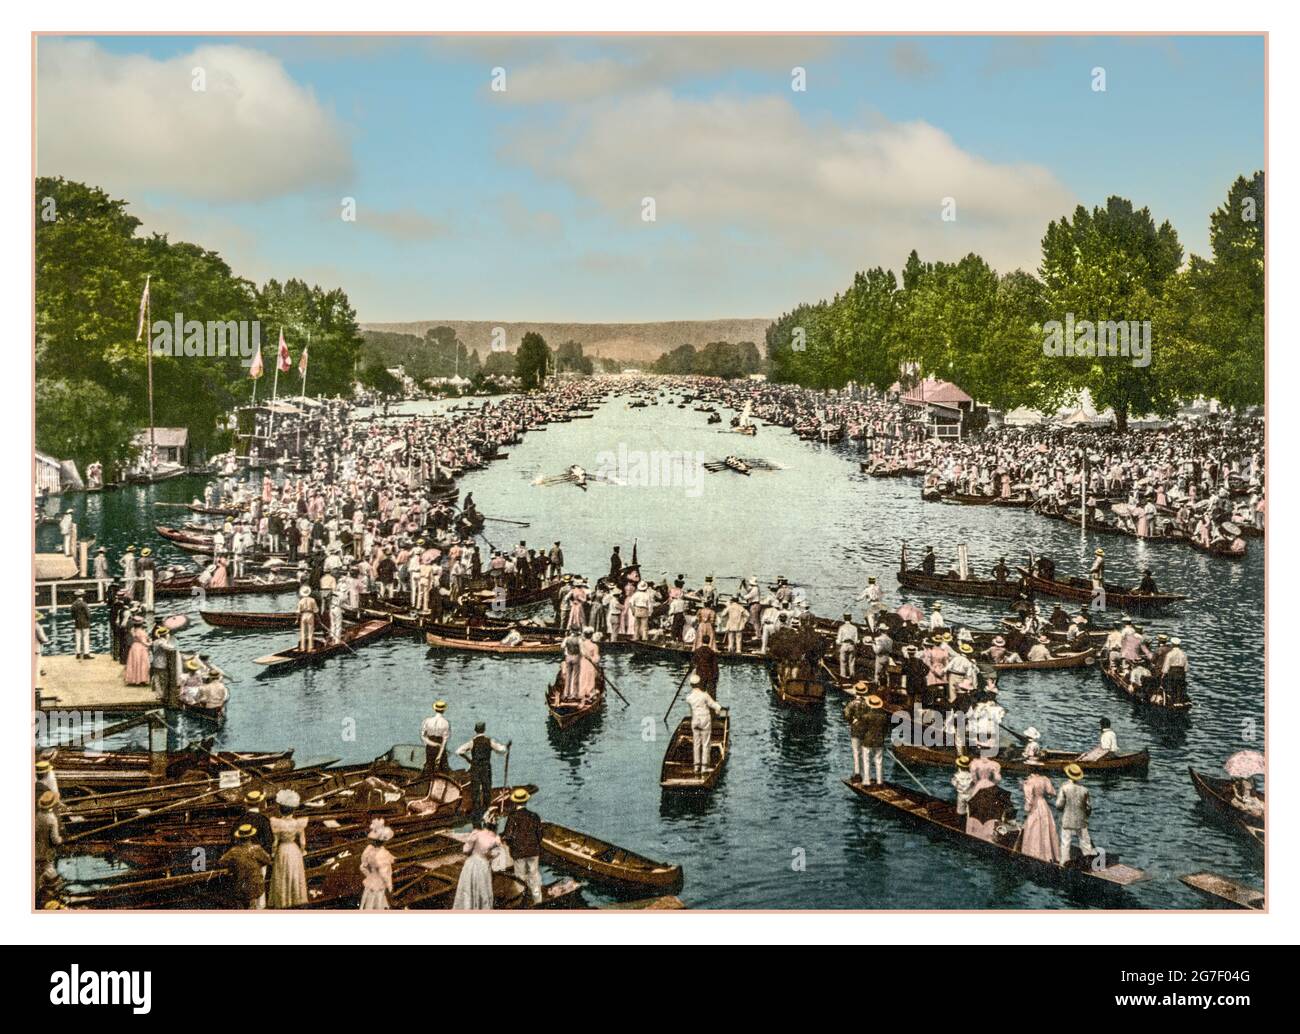 [Henley Regatta Archive Retro 1900s Victorian England] boating fashion lifestyle drinking activities competition on The River Thames Henley UK Date Created/Published :1900s  Photochrom, colour. Stock Photo